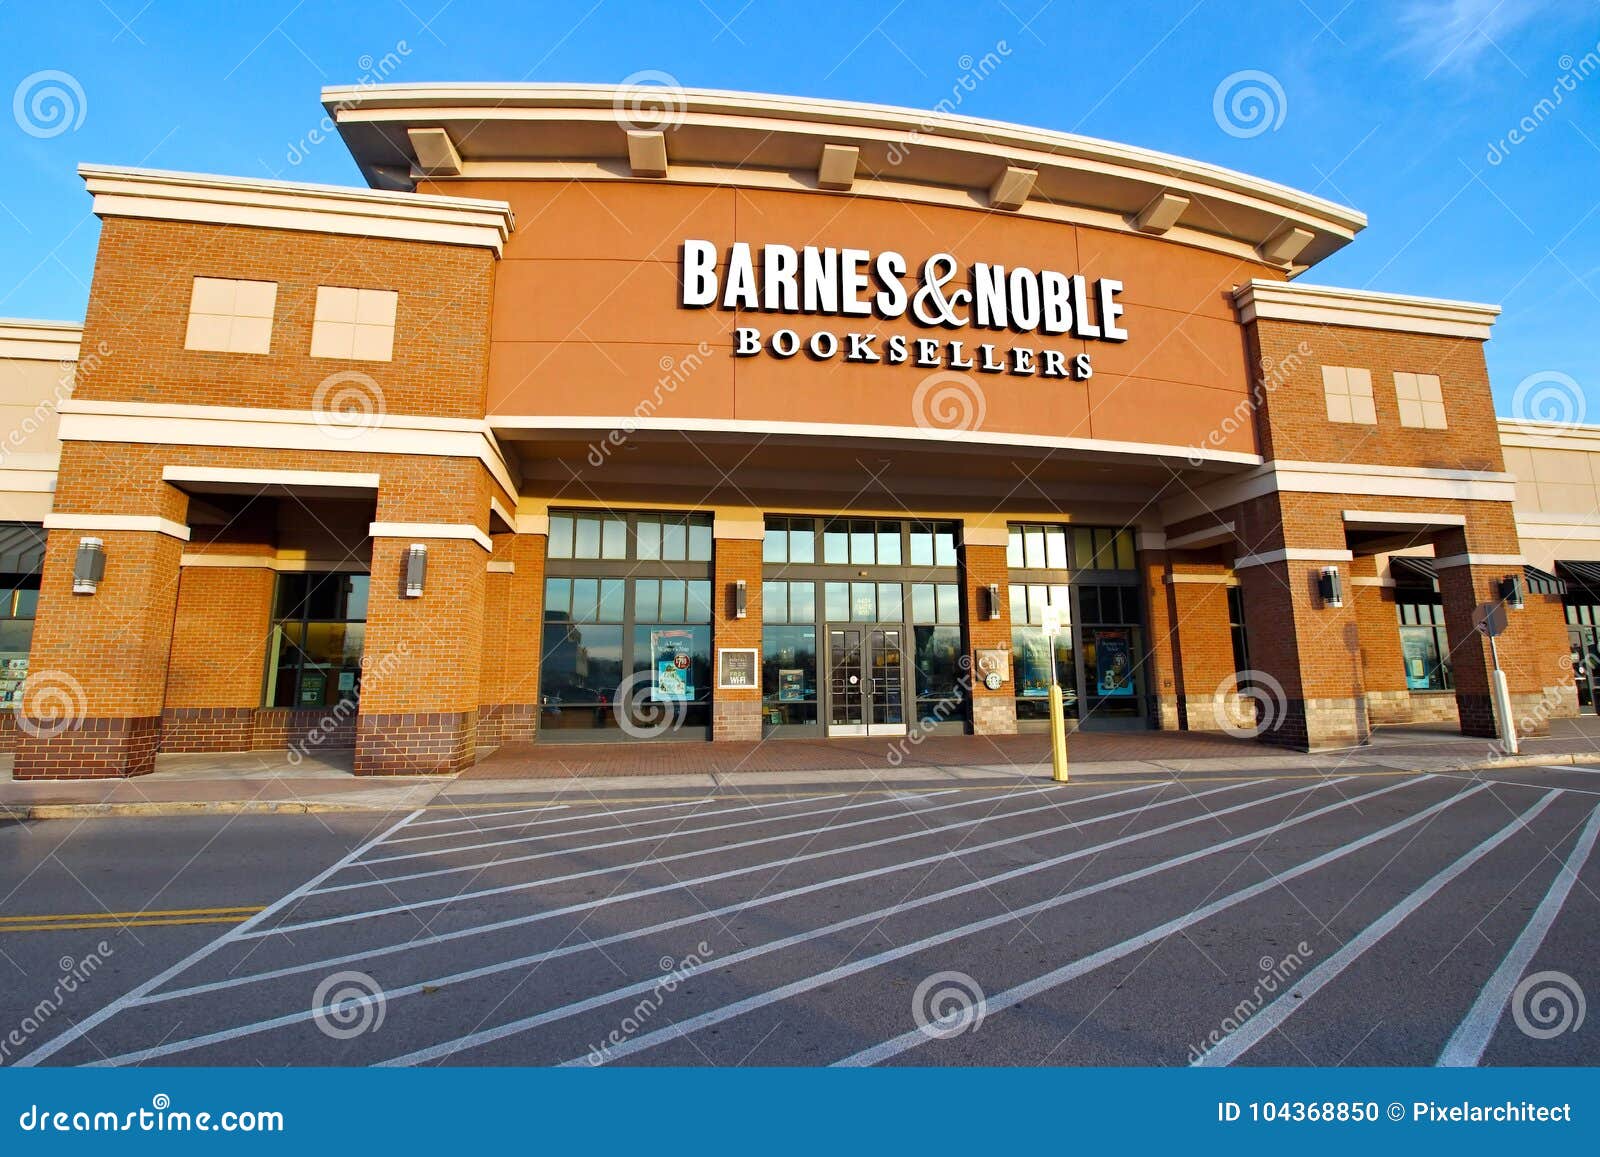 426 Barnes Noble Photos Free Royalty Free Stock Photos From Dreamstime